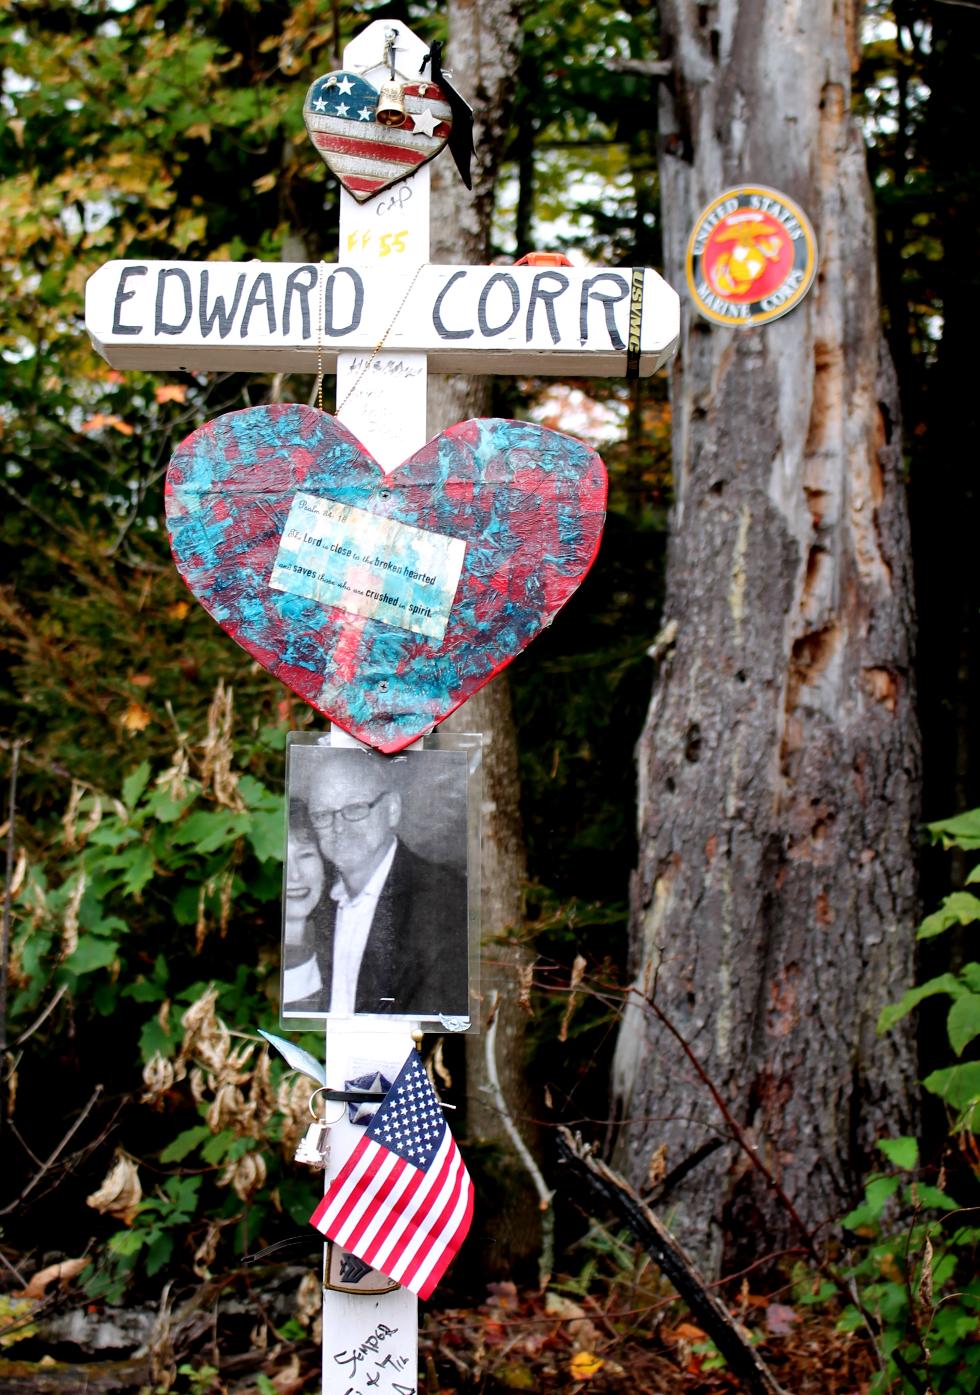 Edward Corr - Lakeville Mass Lost in Randolph NH Motorcycle Tragedy